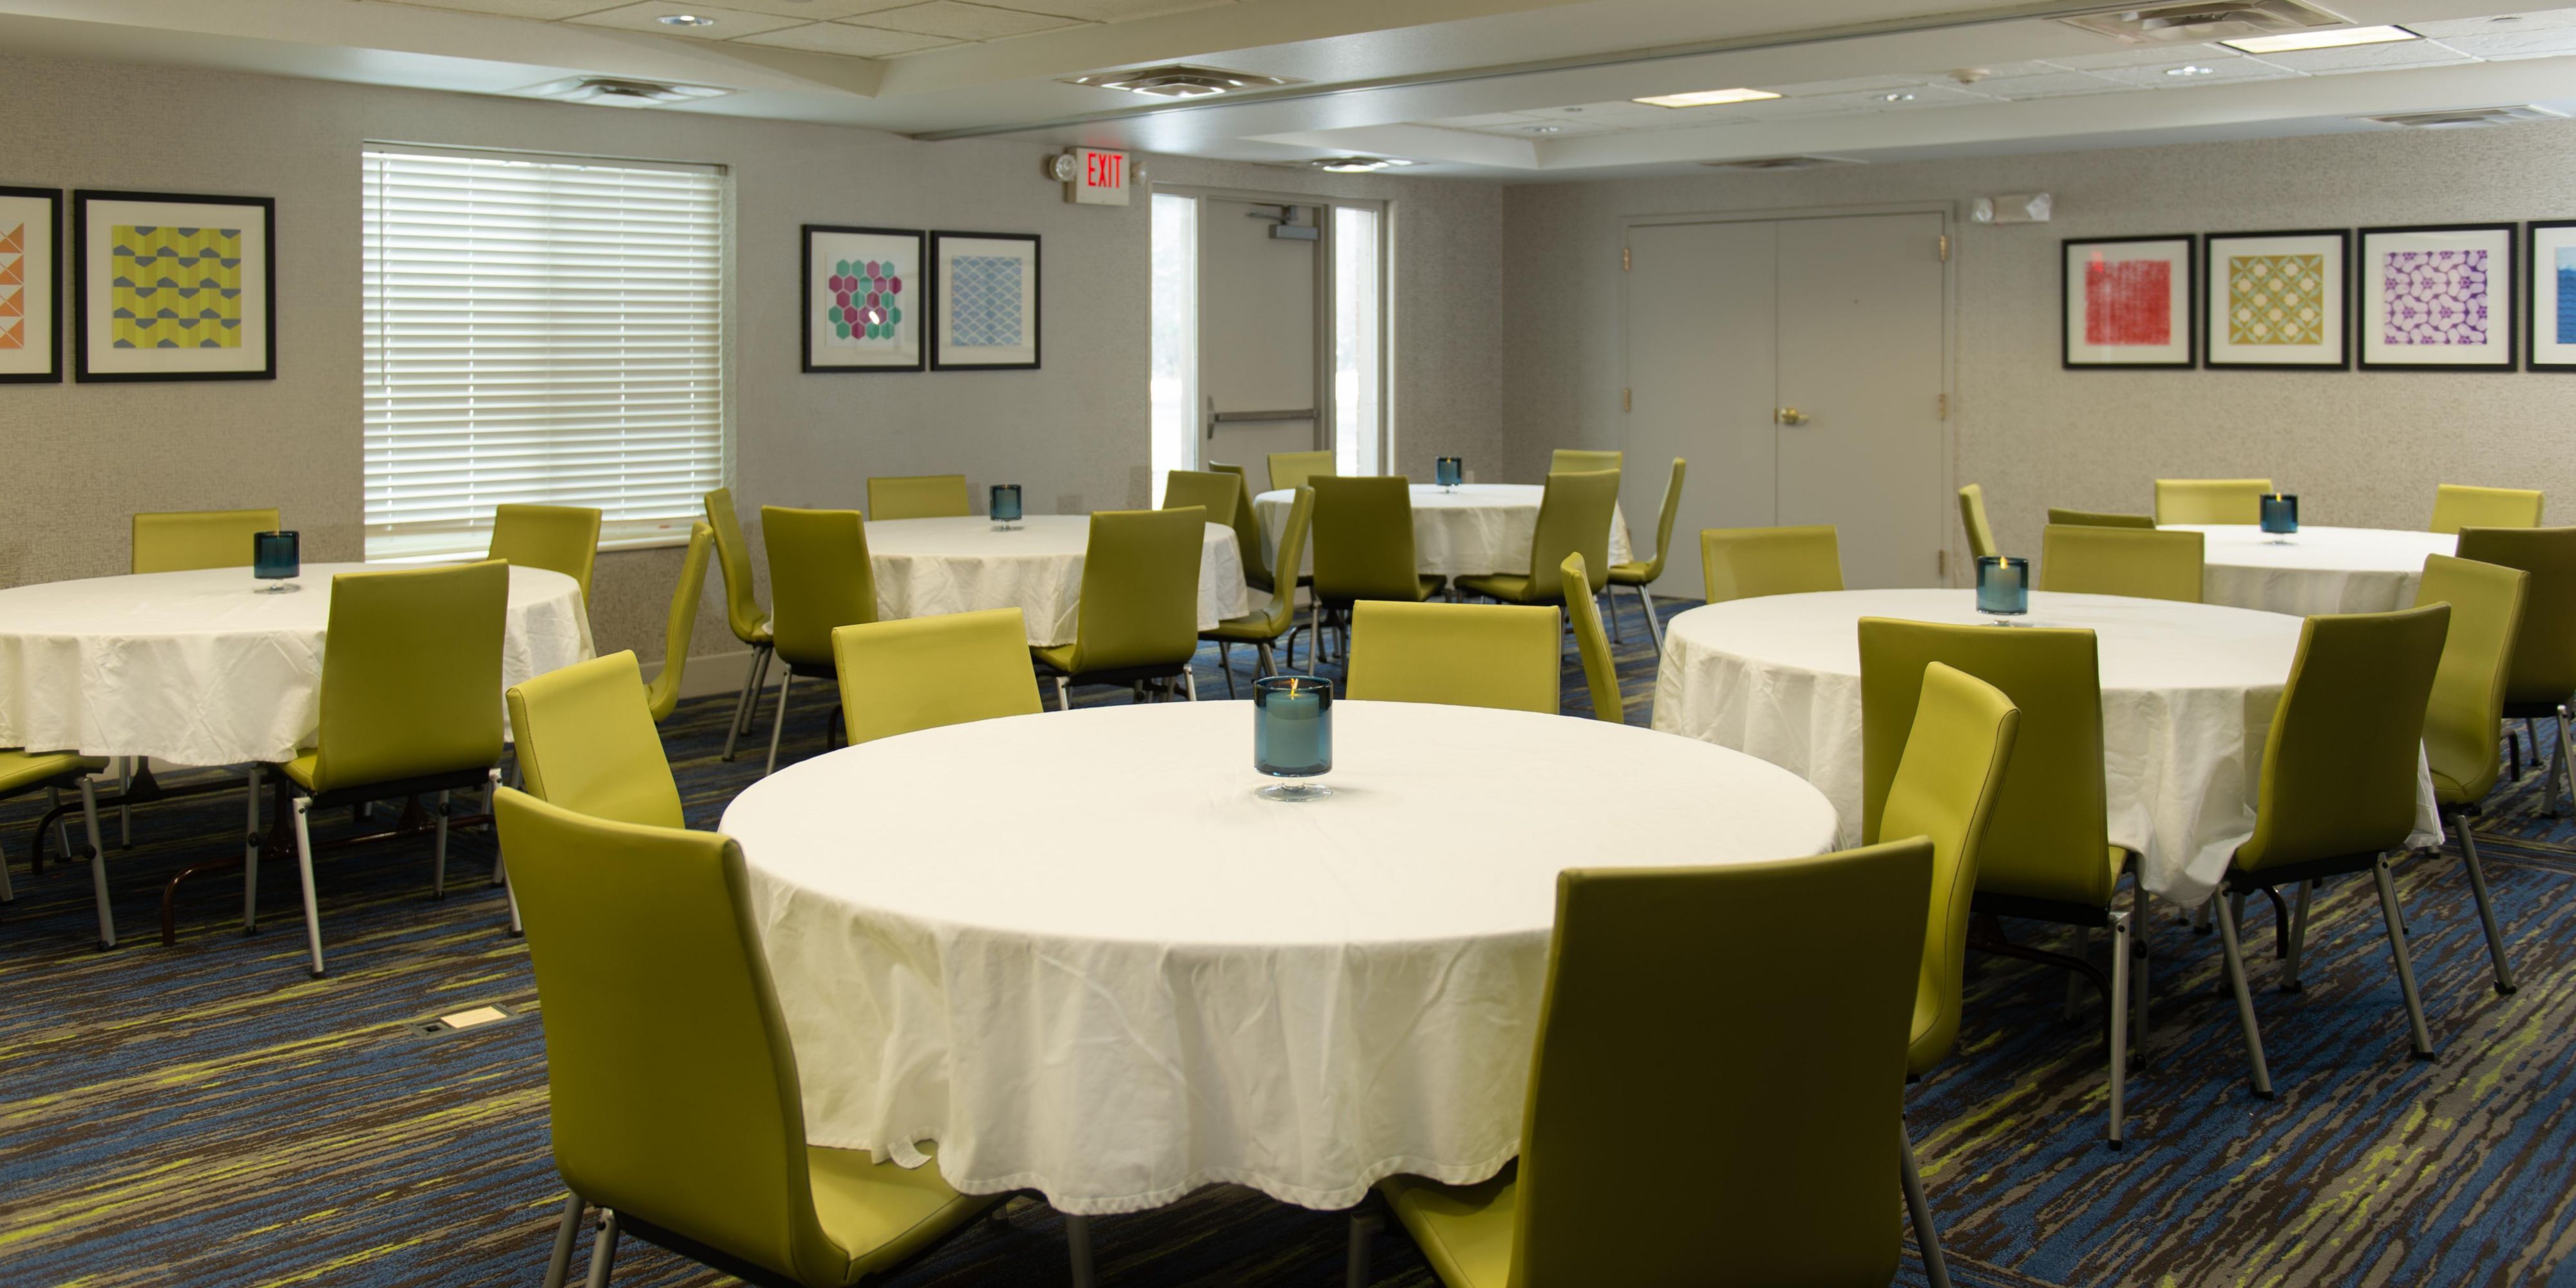 Have a small group that needs to quiet place to meet? We have the meeting room for you! Contact our hotel directly for availability and group pricing, 715-359-1280